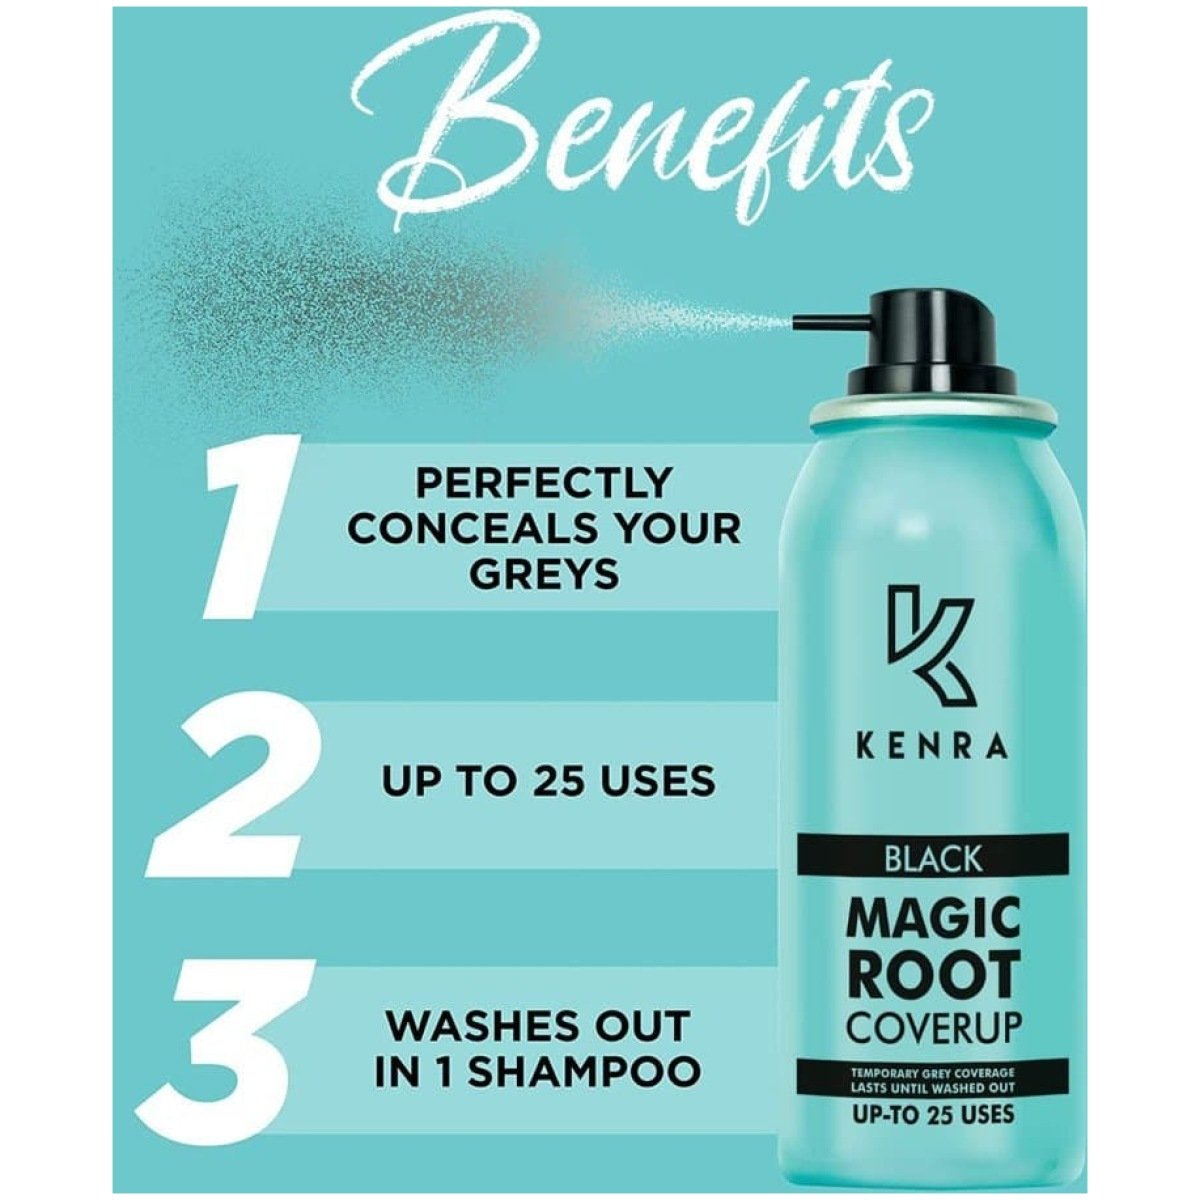 Kenra Magic Retouch Temporary Root Touch Up Hair Colour Spray Black 75ml